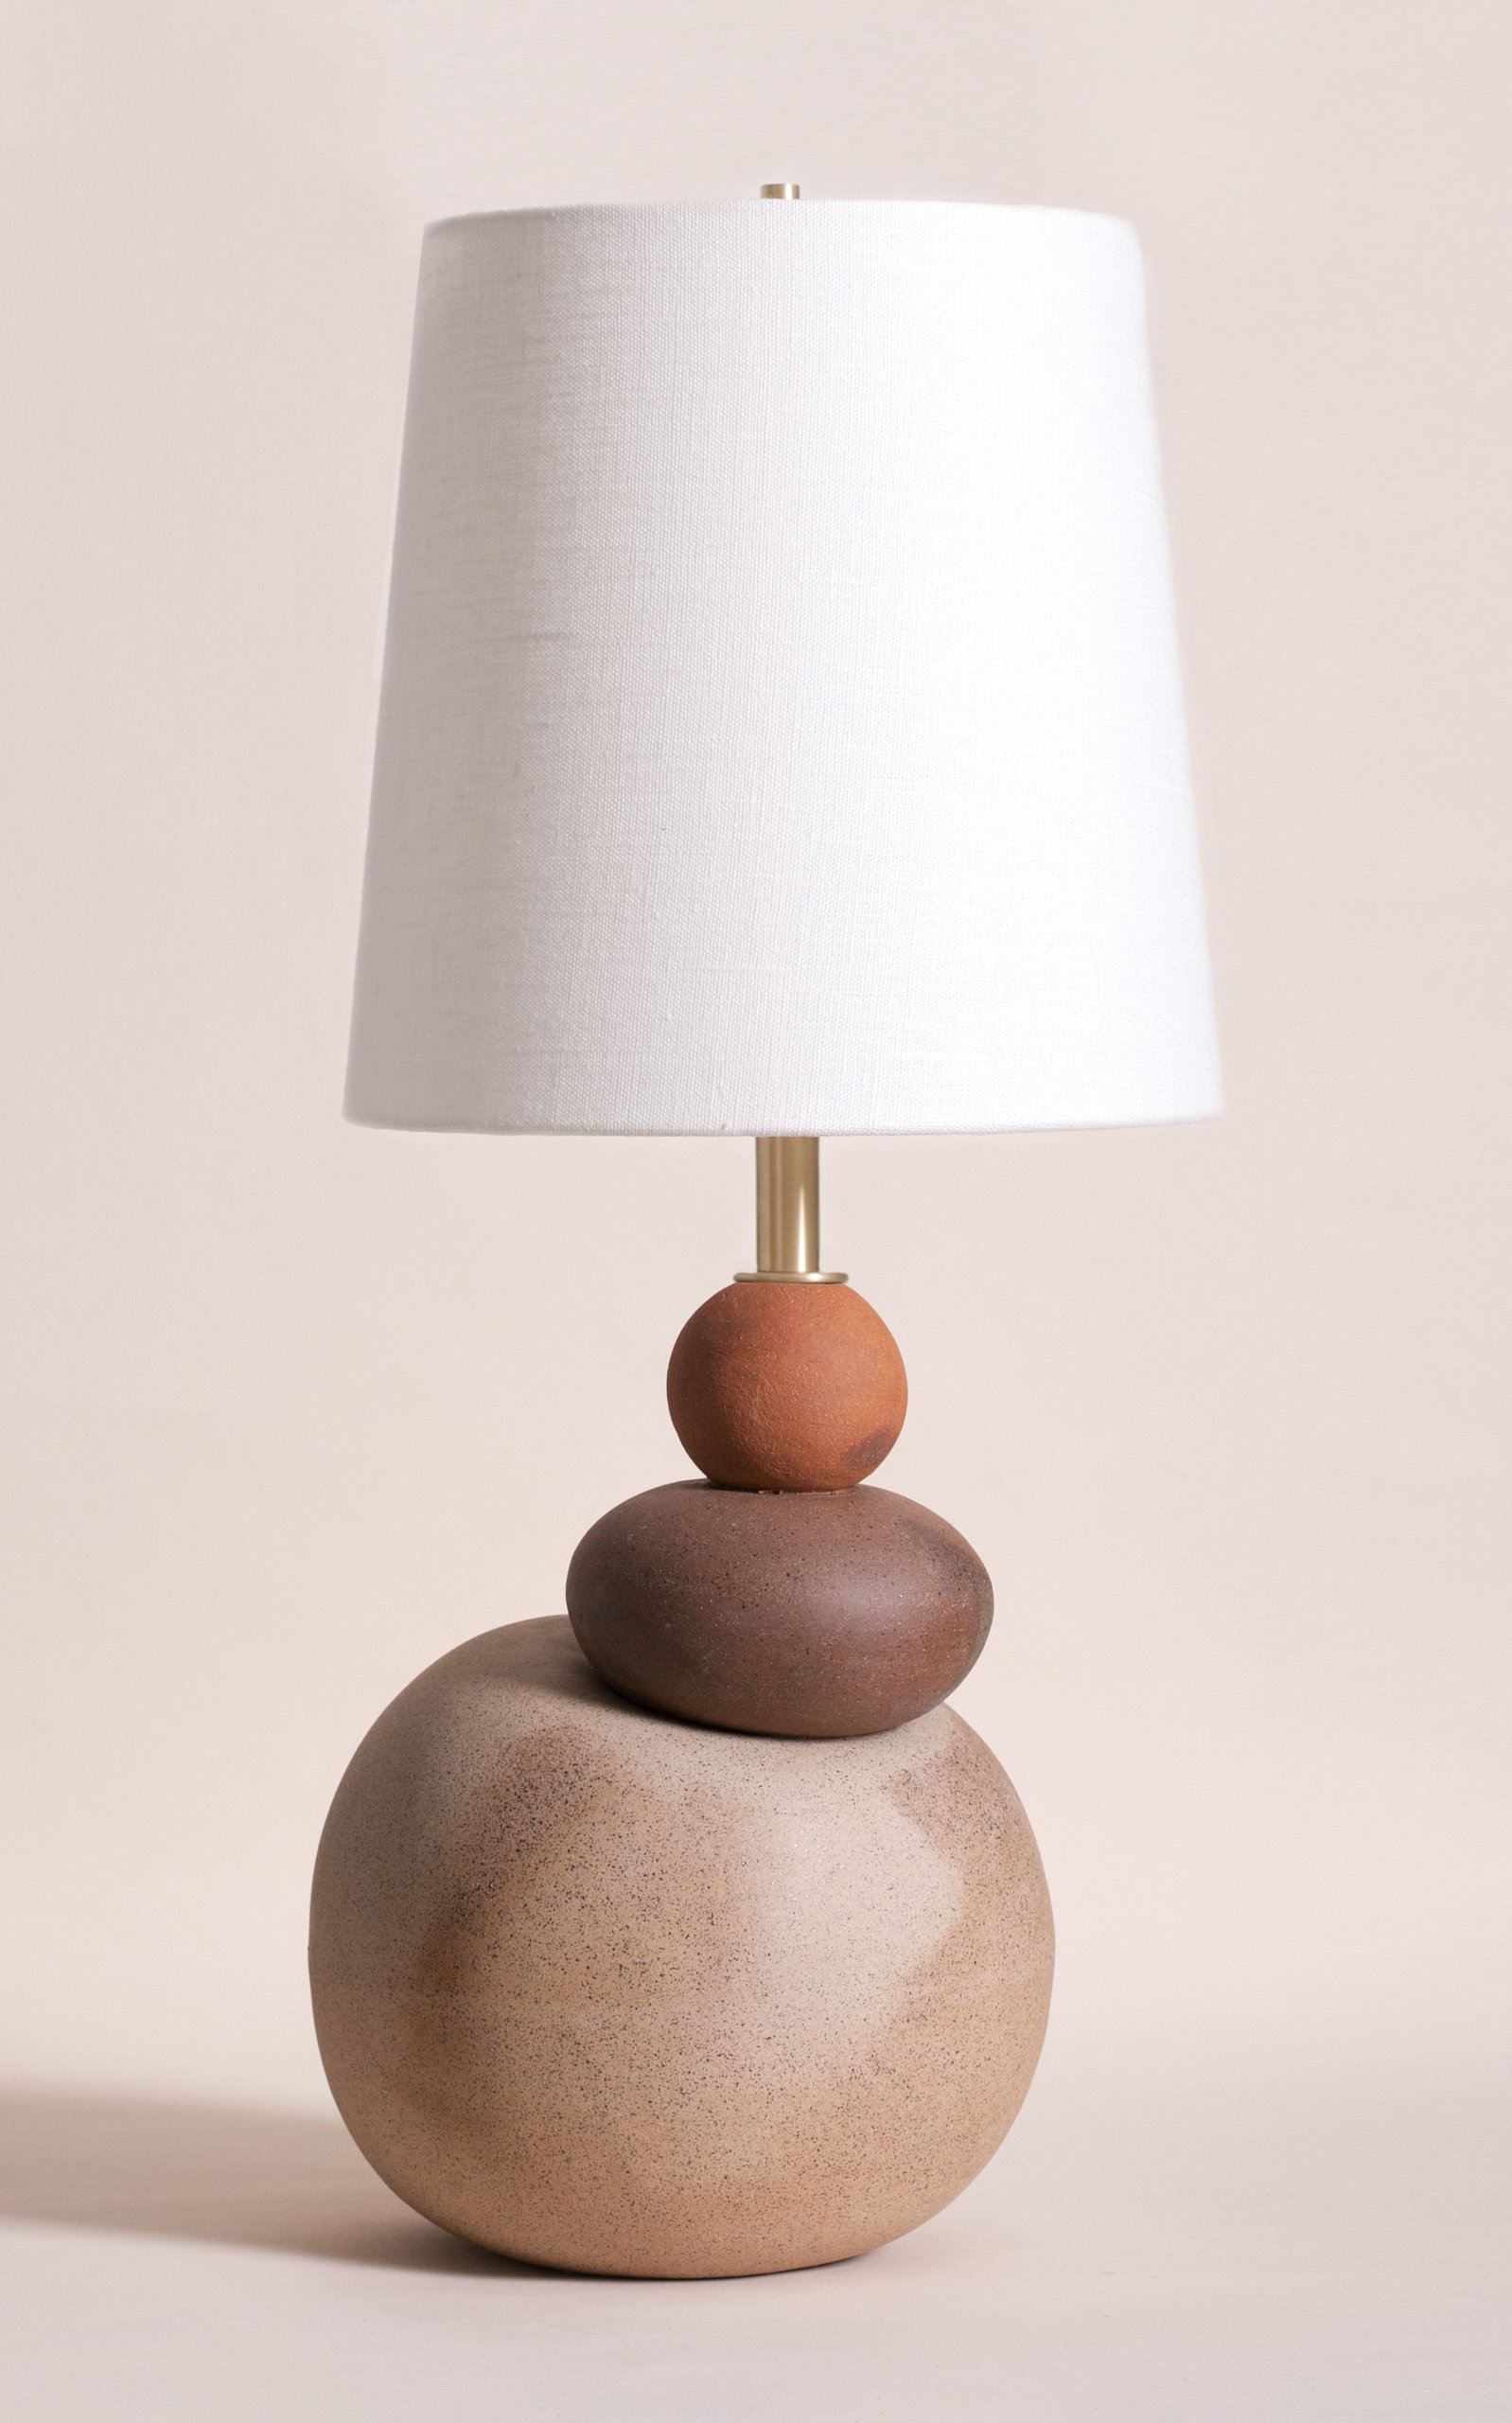 6 Lamp Trends We Re Spotting Everywhere, Latest Trends In Table Lamps